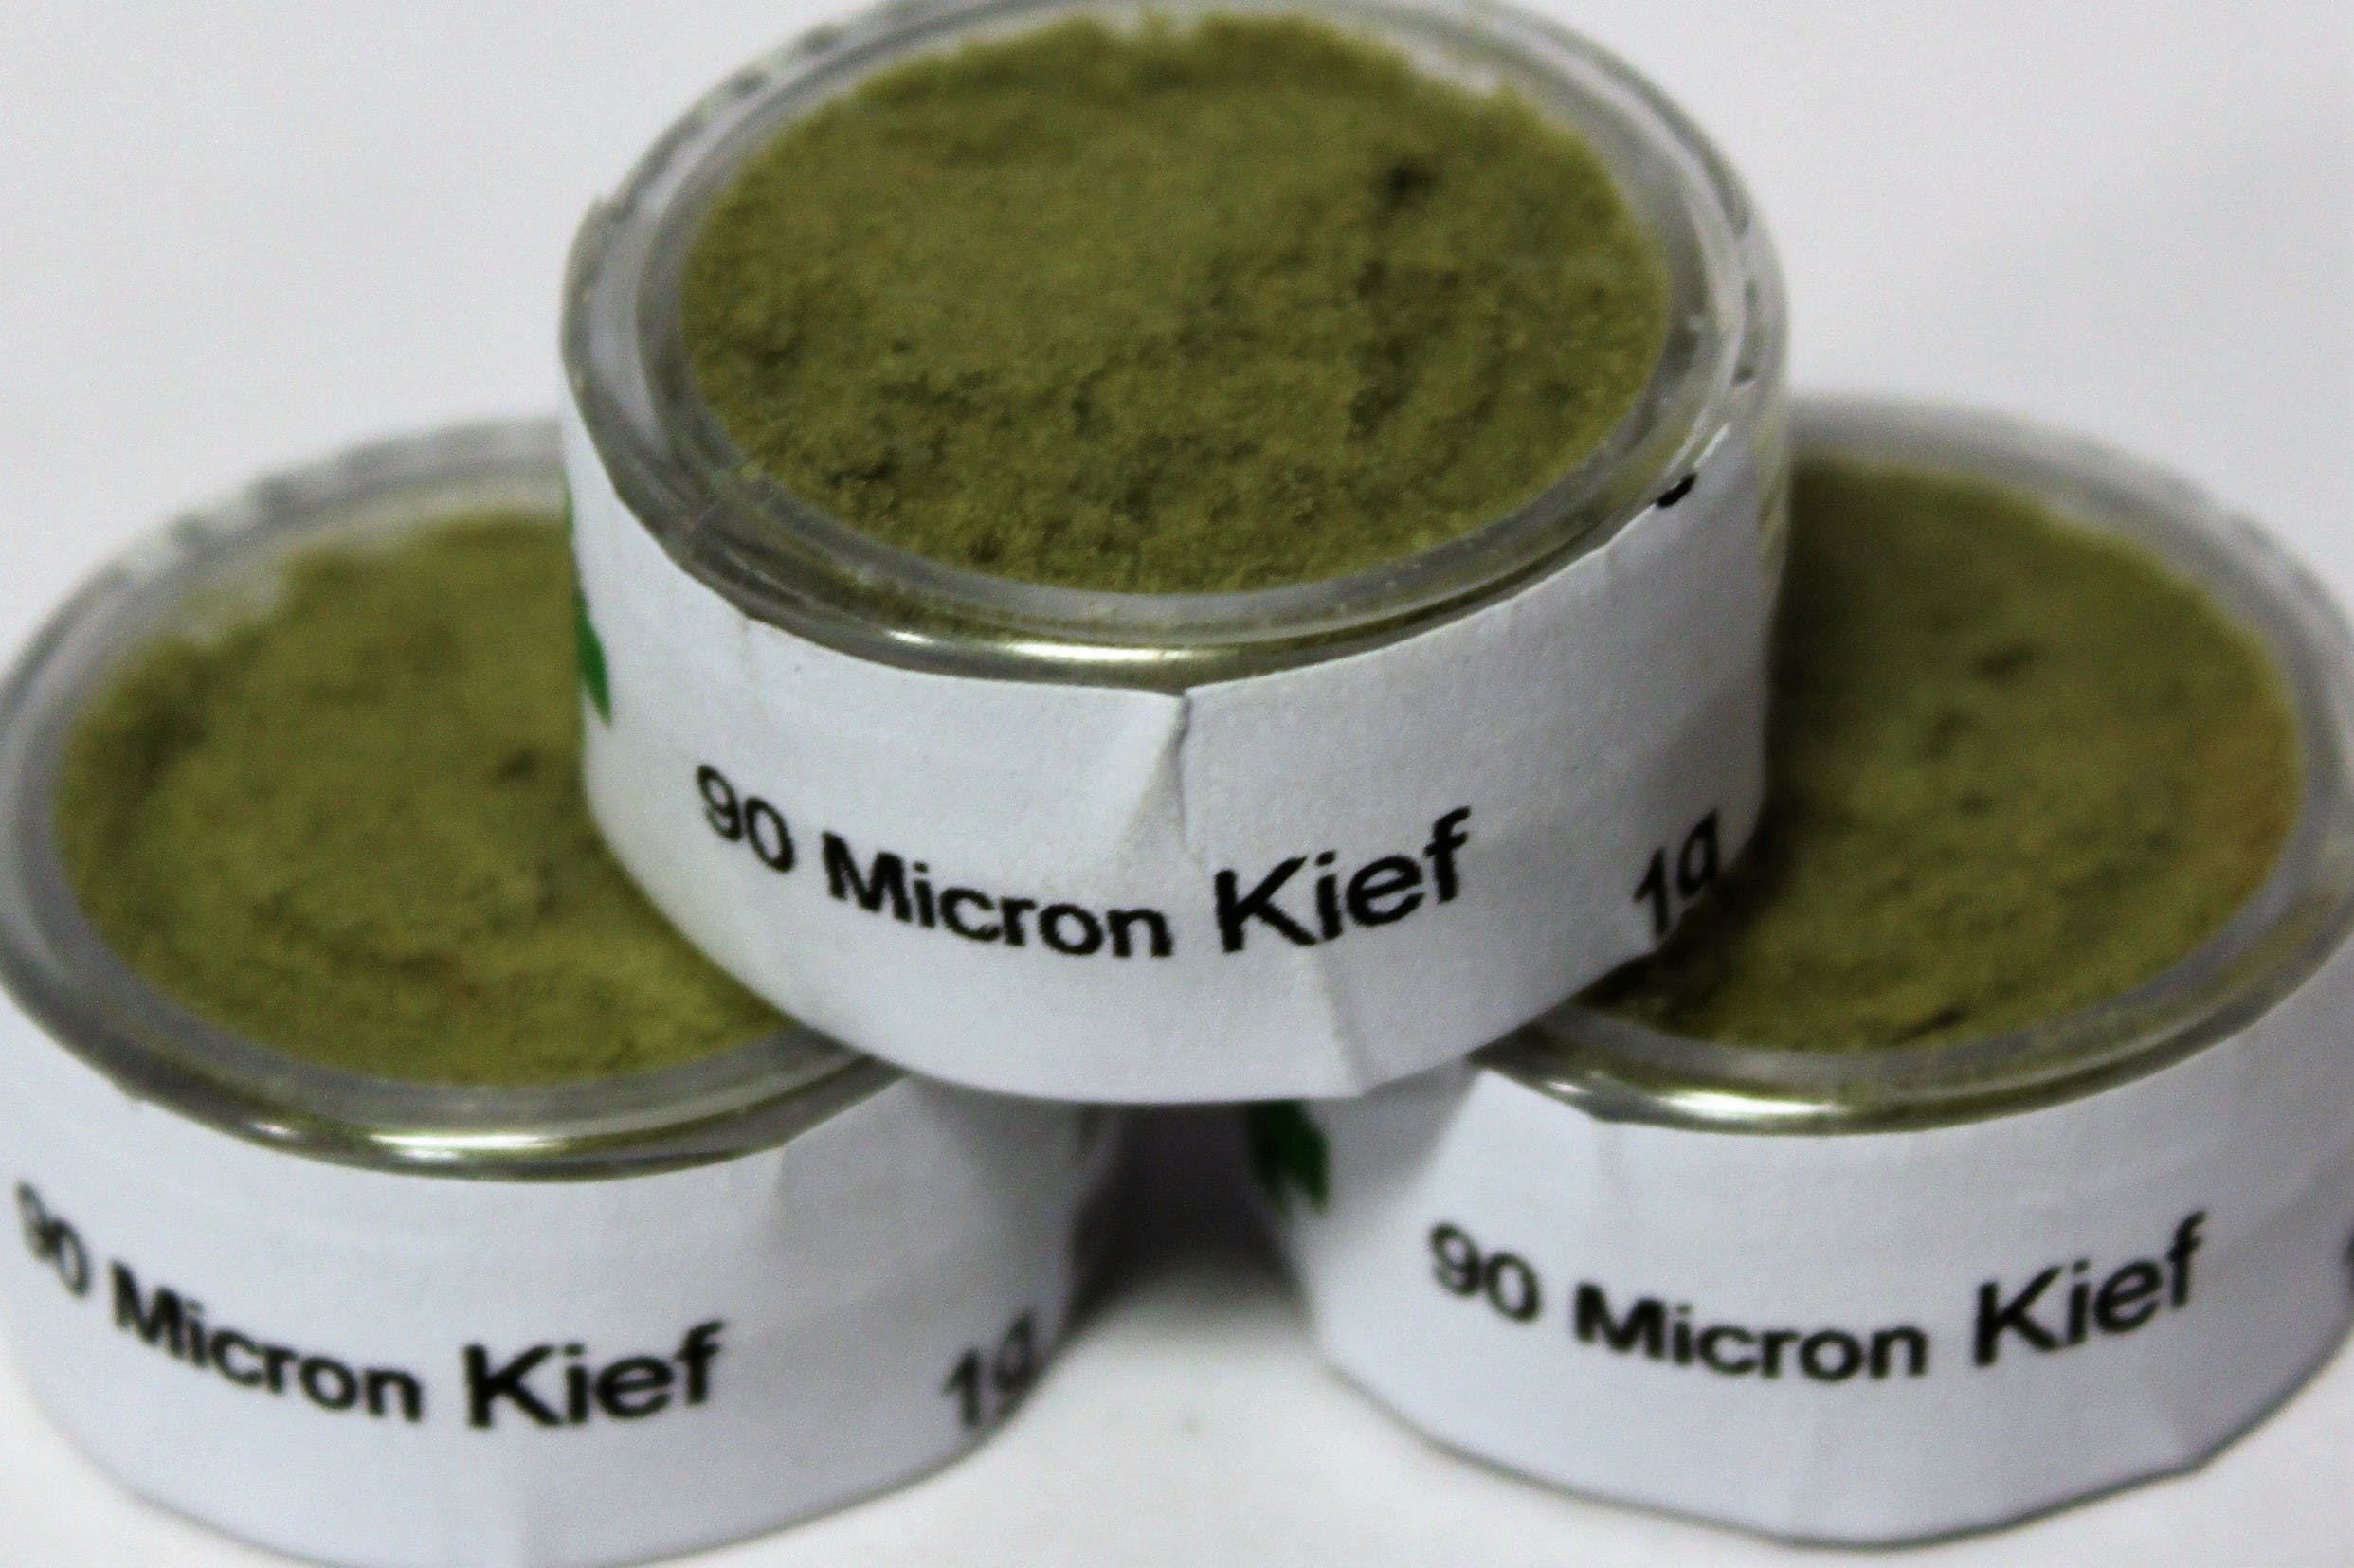 concentrate-90-micron-kief-1g